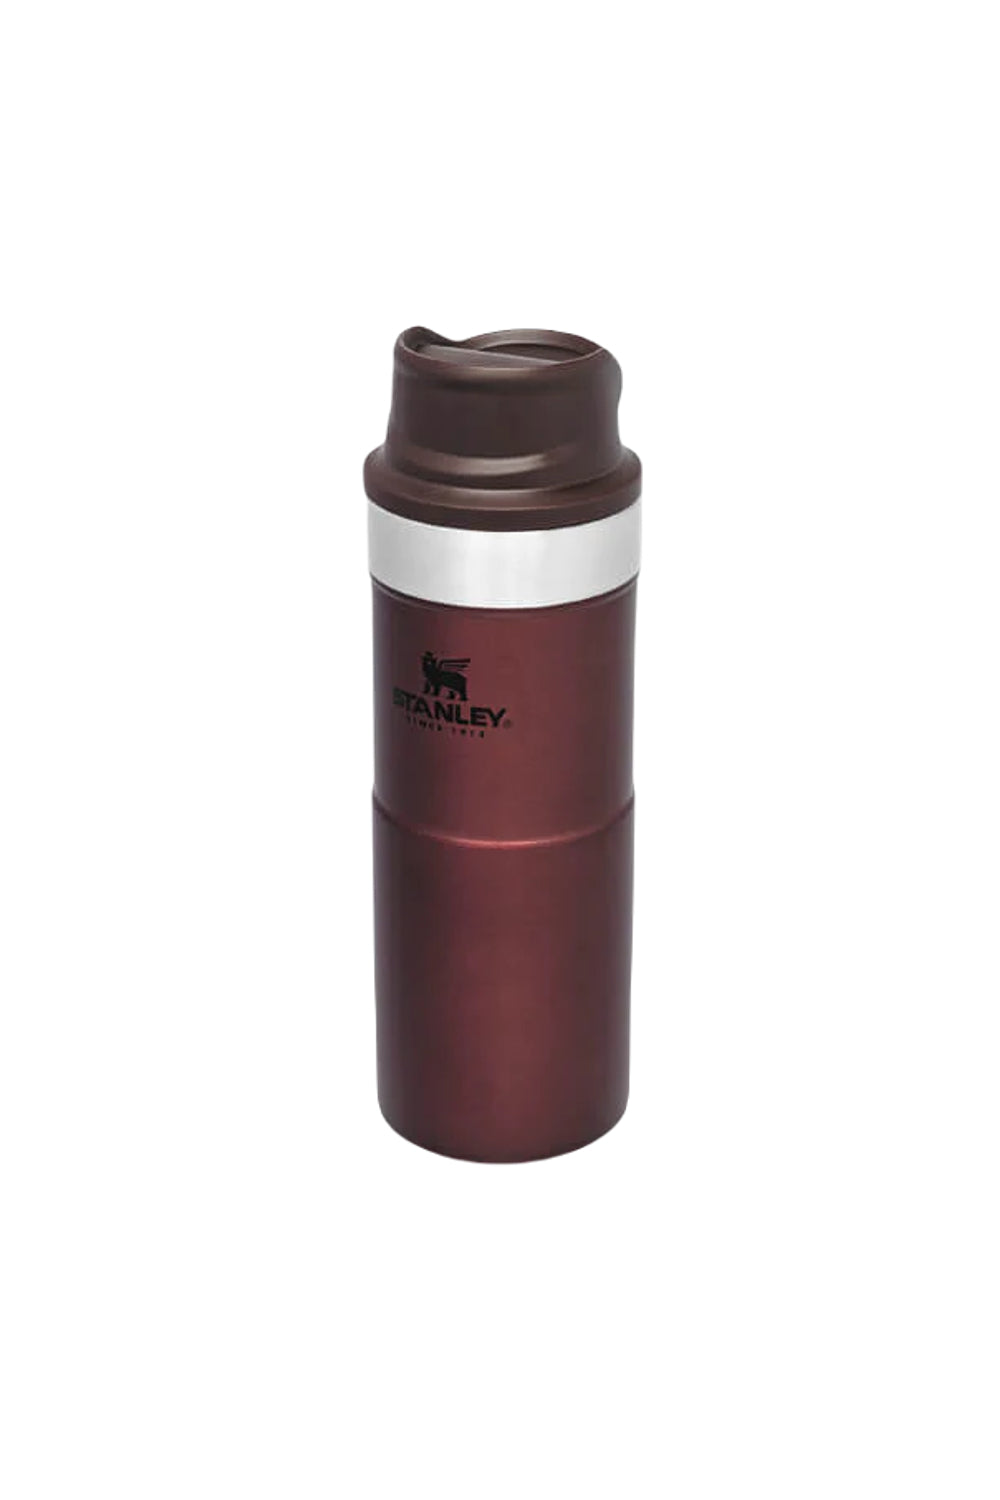 Stanley Classic Trigger Action Travel Mug 0.35L in Wine